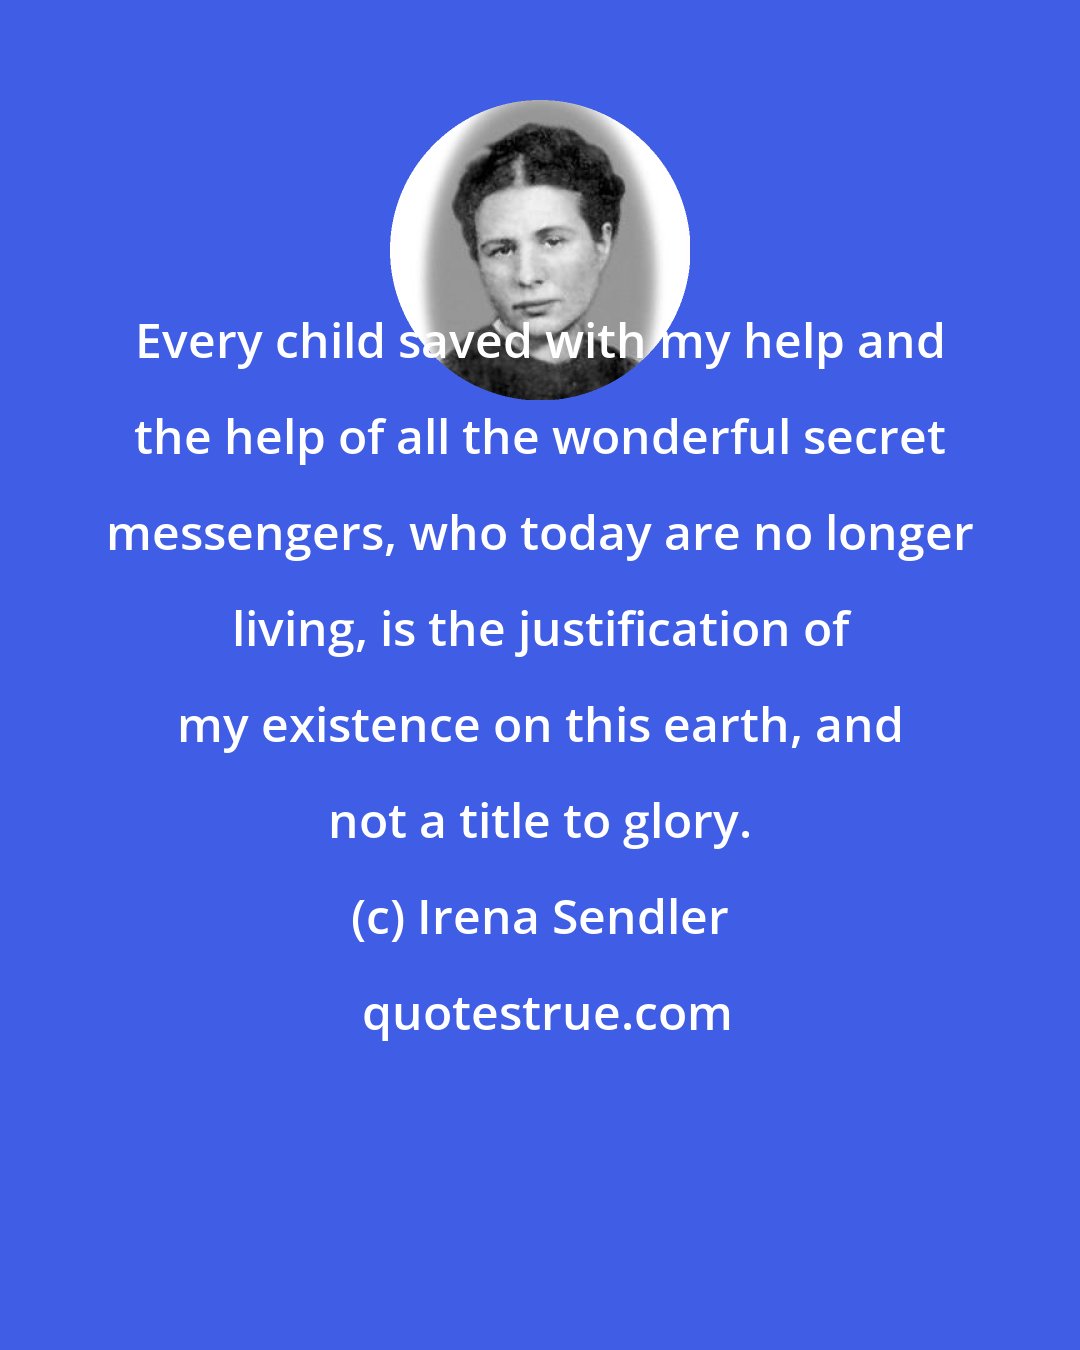 Irena Sendler: Every child saved with my help and the help of all the wonderful secret messengers, who today are no longer living, is the justification of my existence on this earth, and not a title to glory.